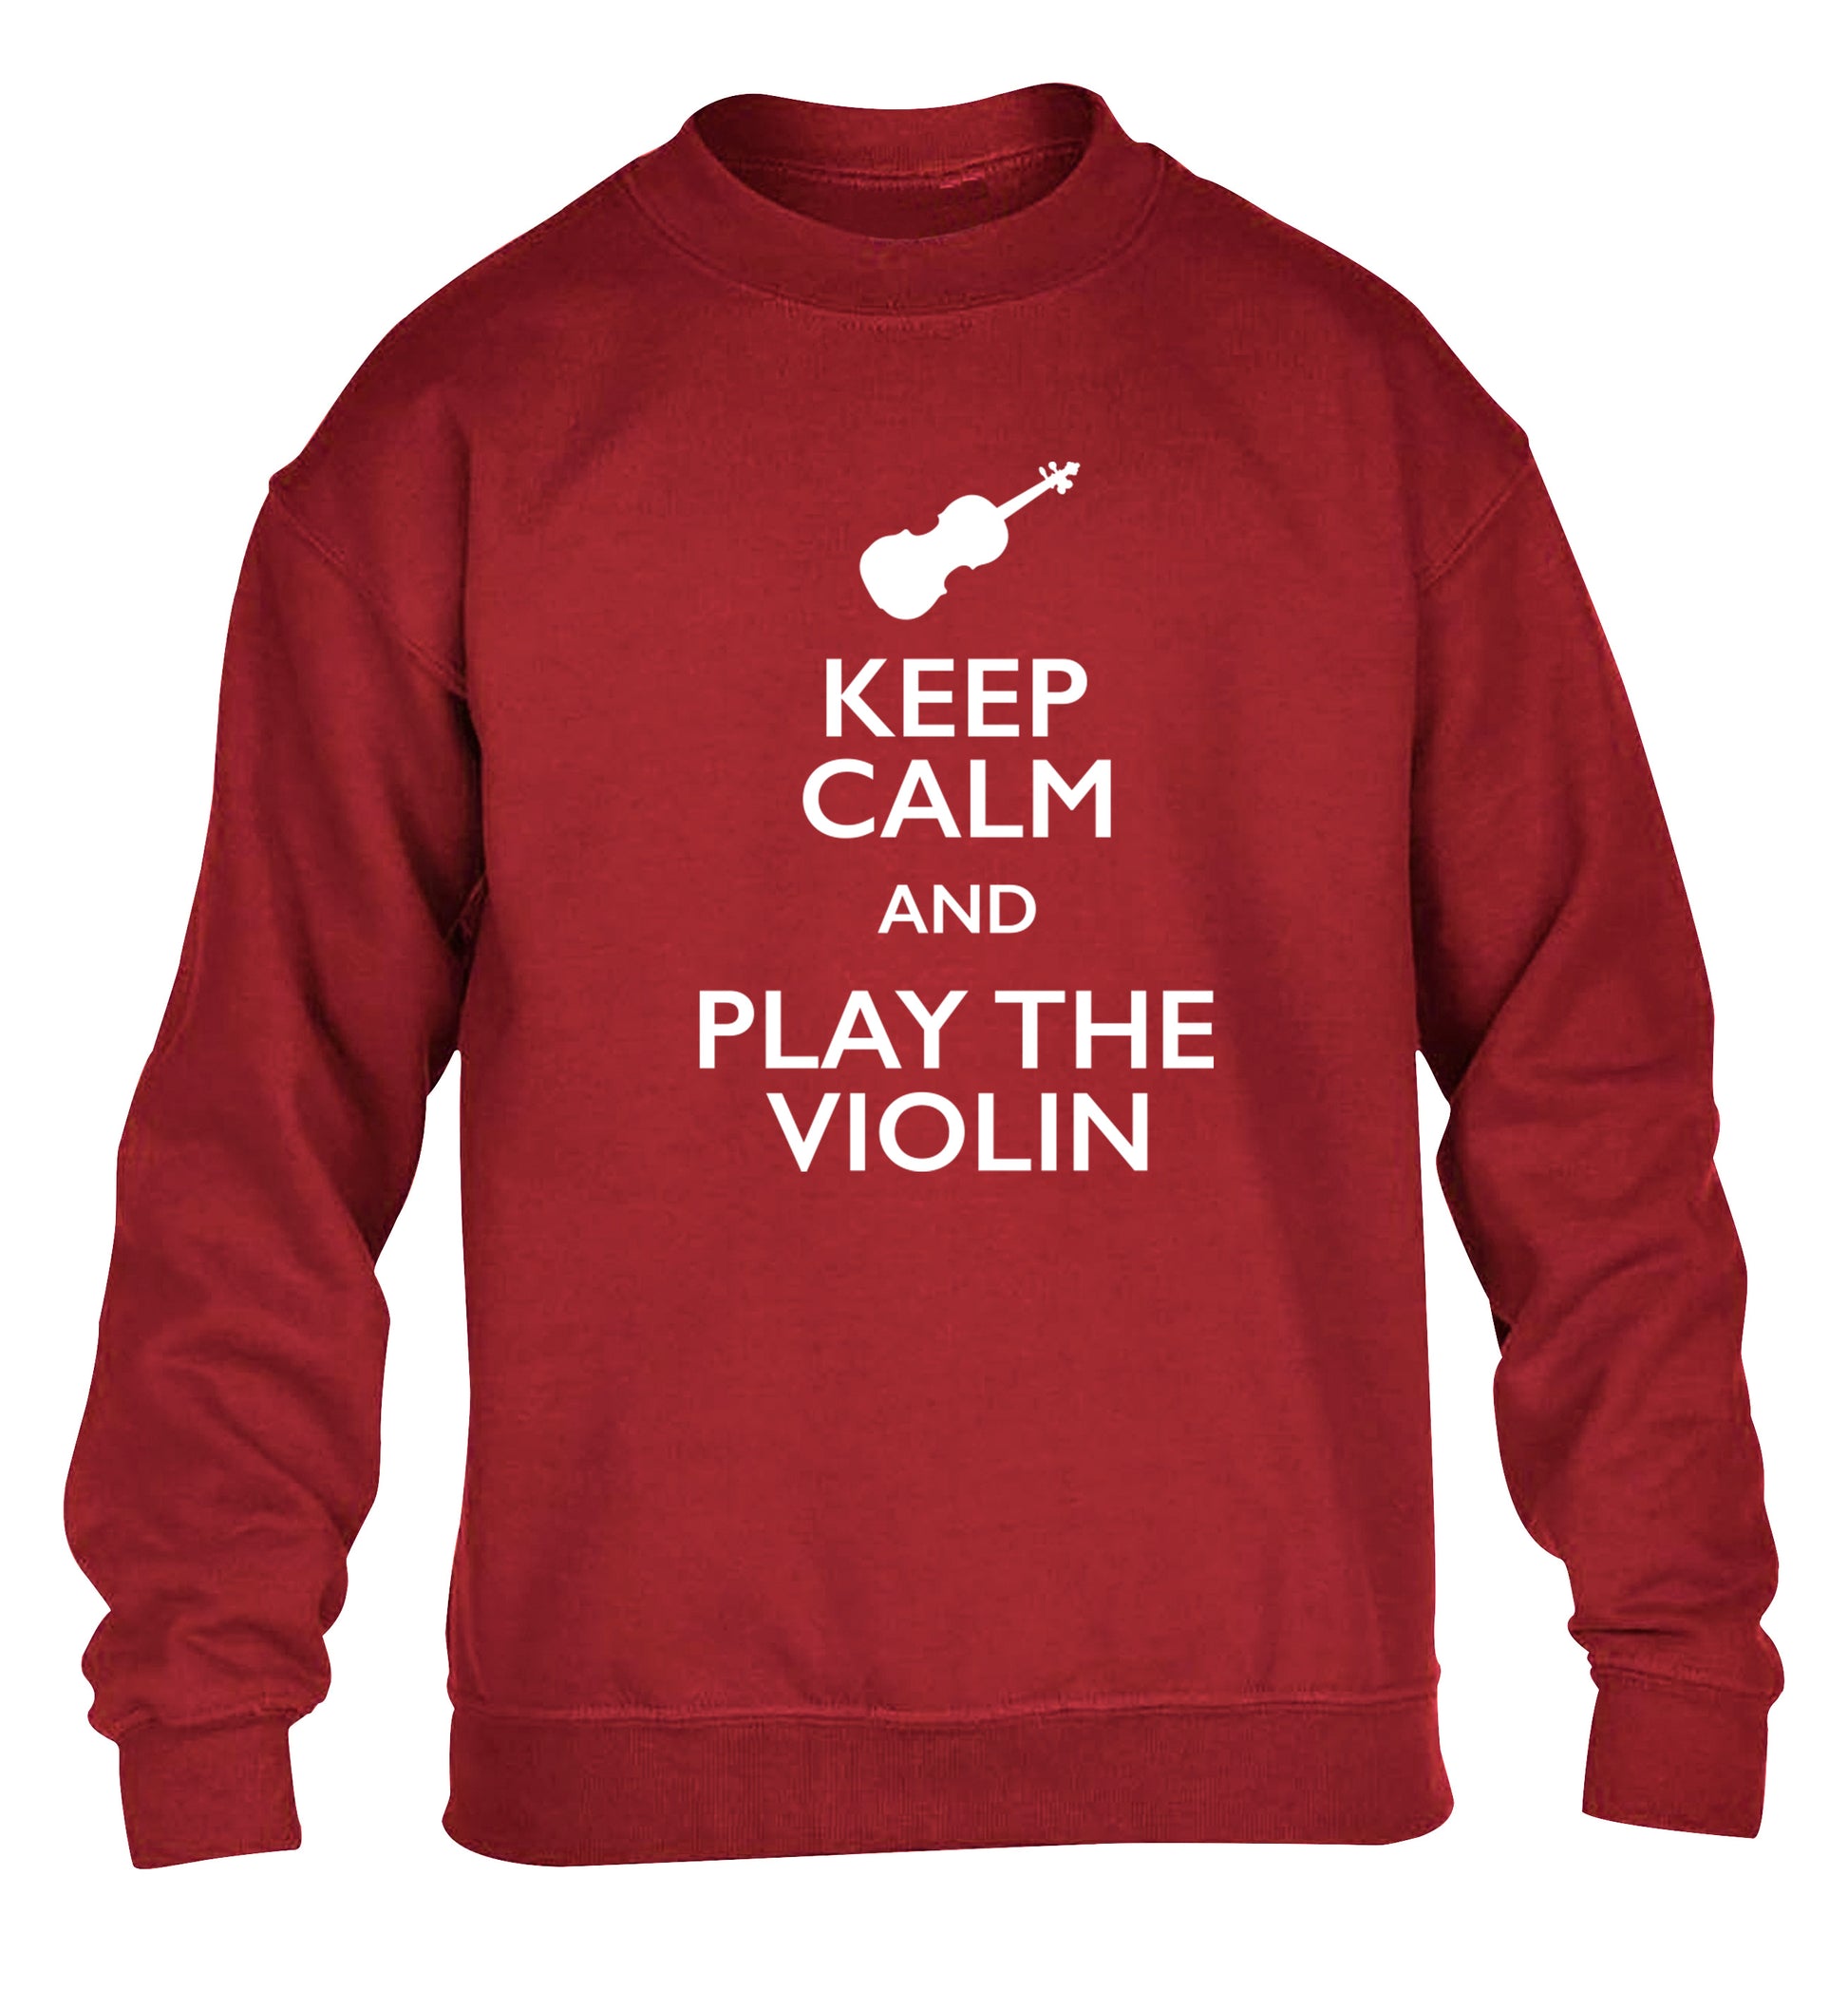 Keep calm and play the violin children's grey sweater 12-13 Years